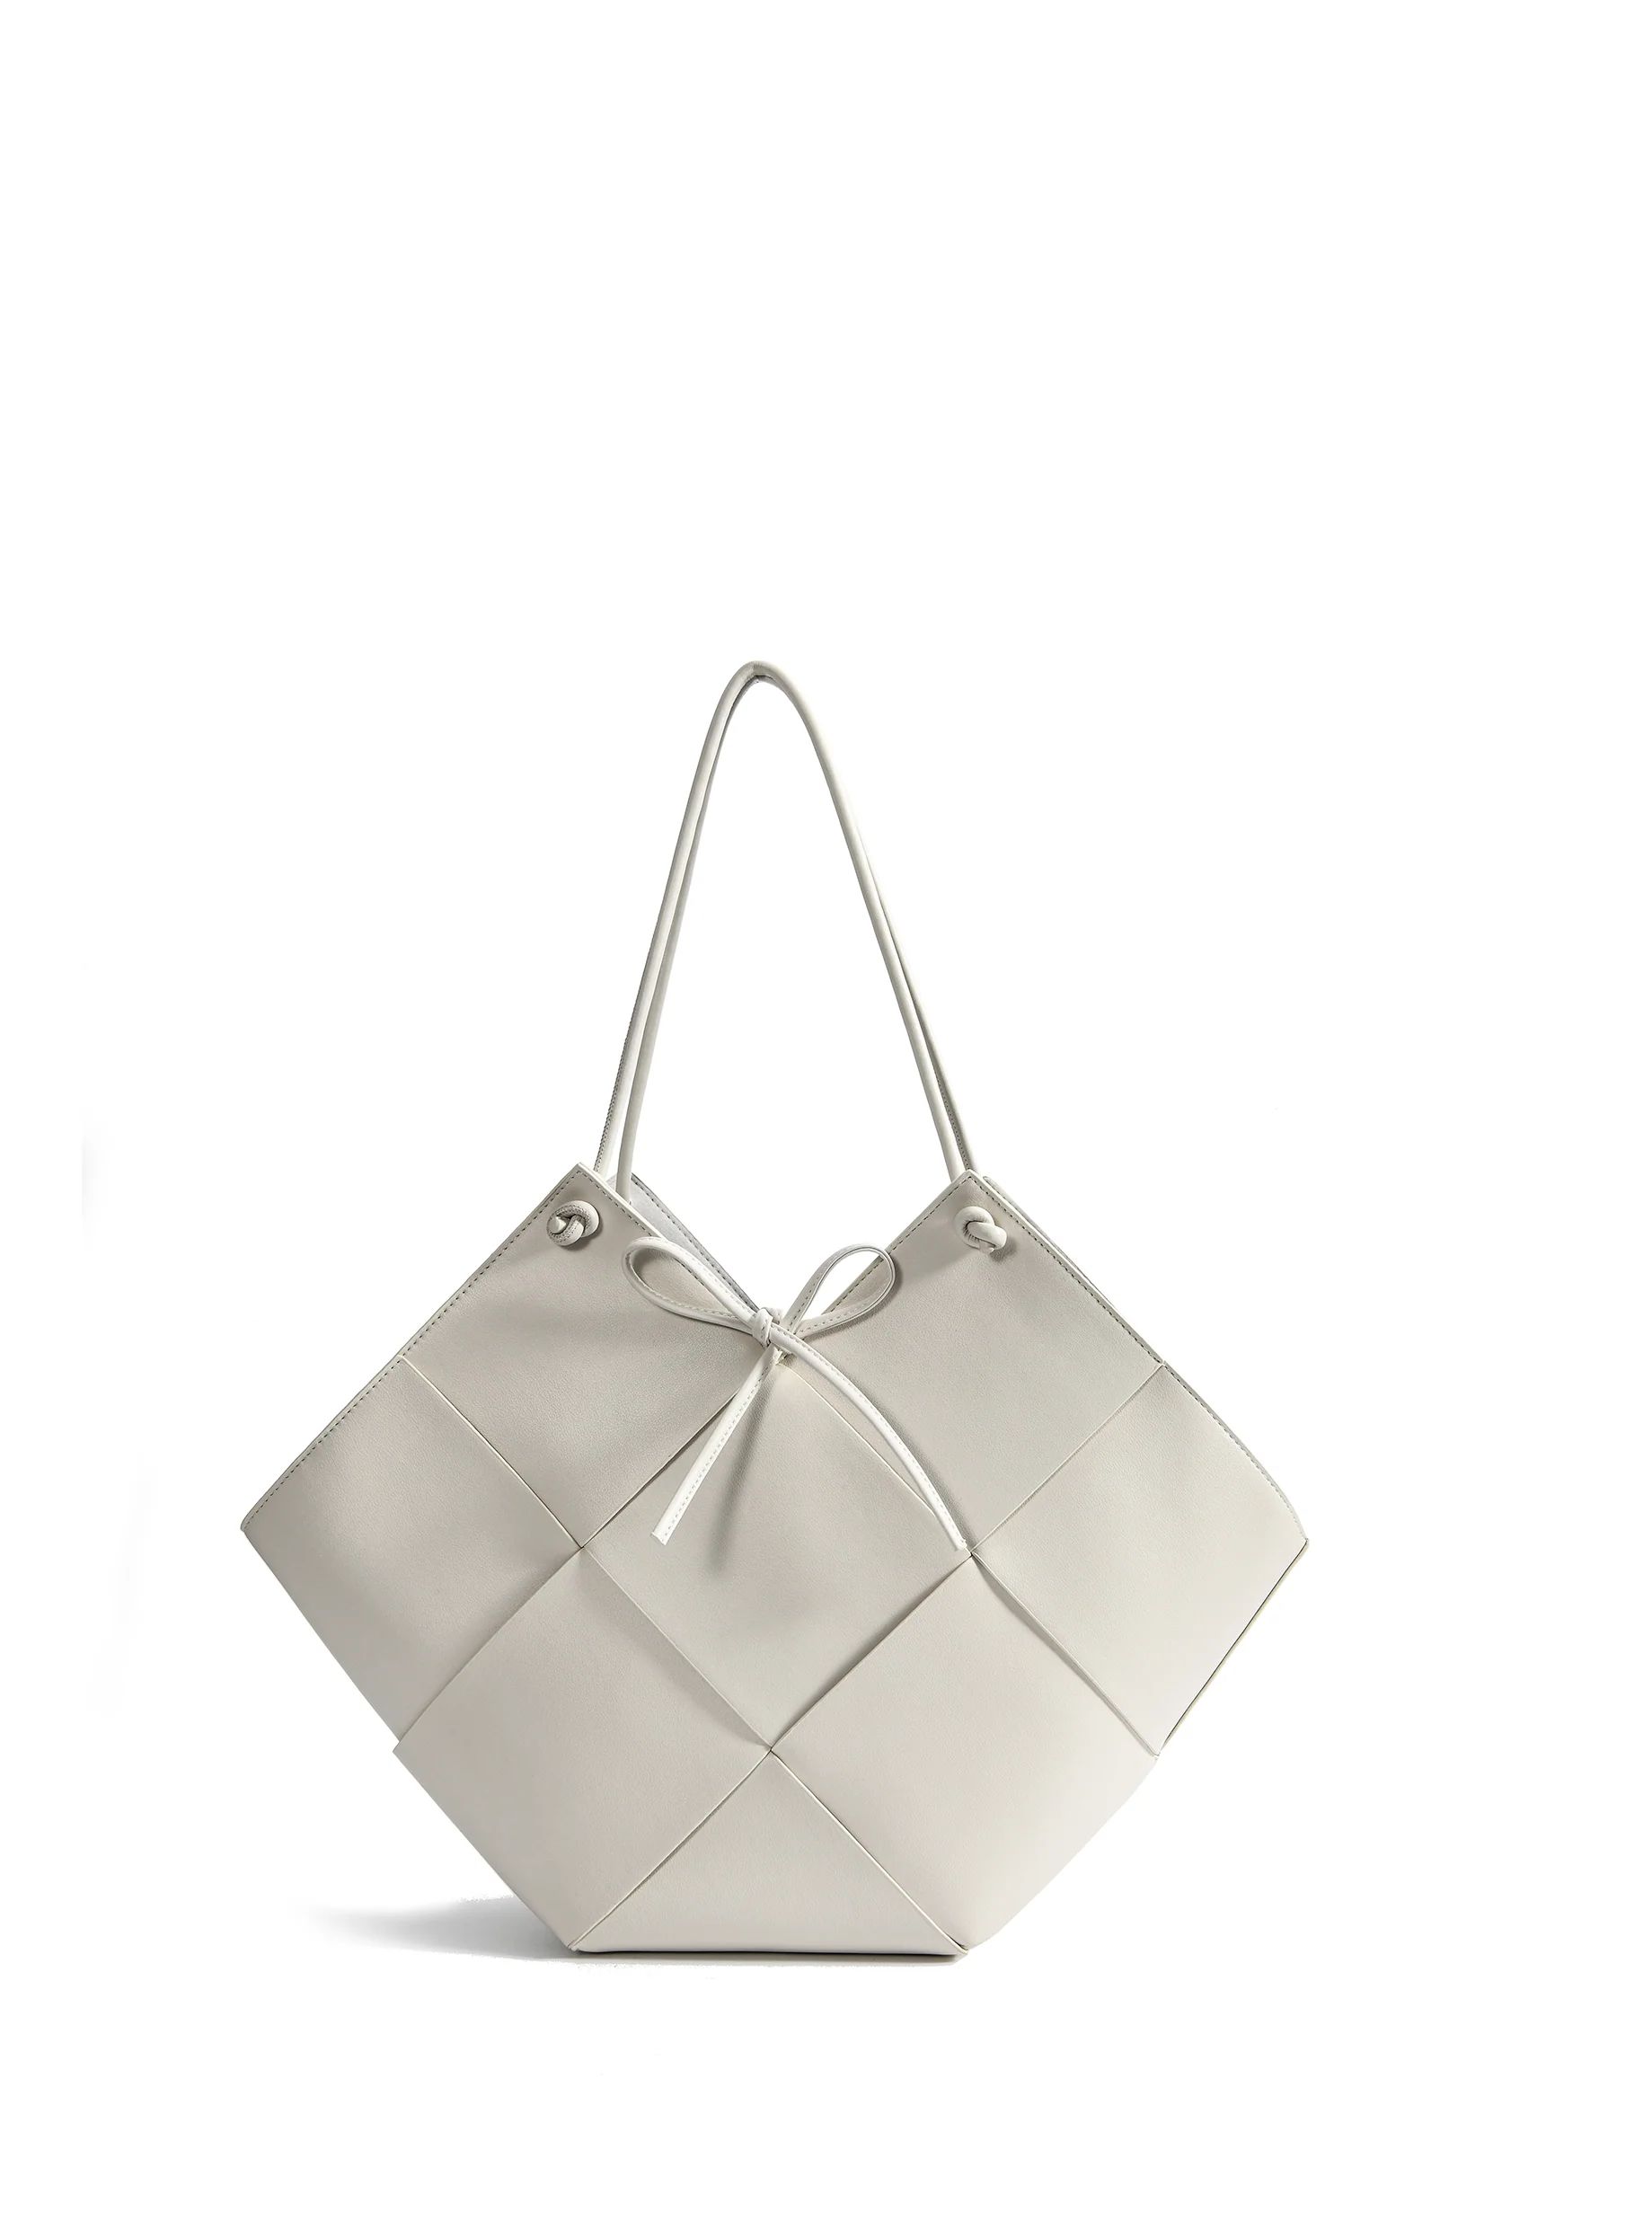 Taylor Contexture Leather Bag, Off White | Bob Ore Blue Collection